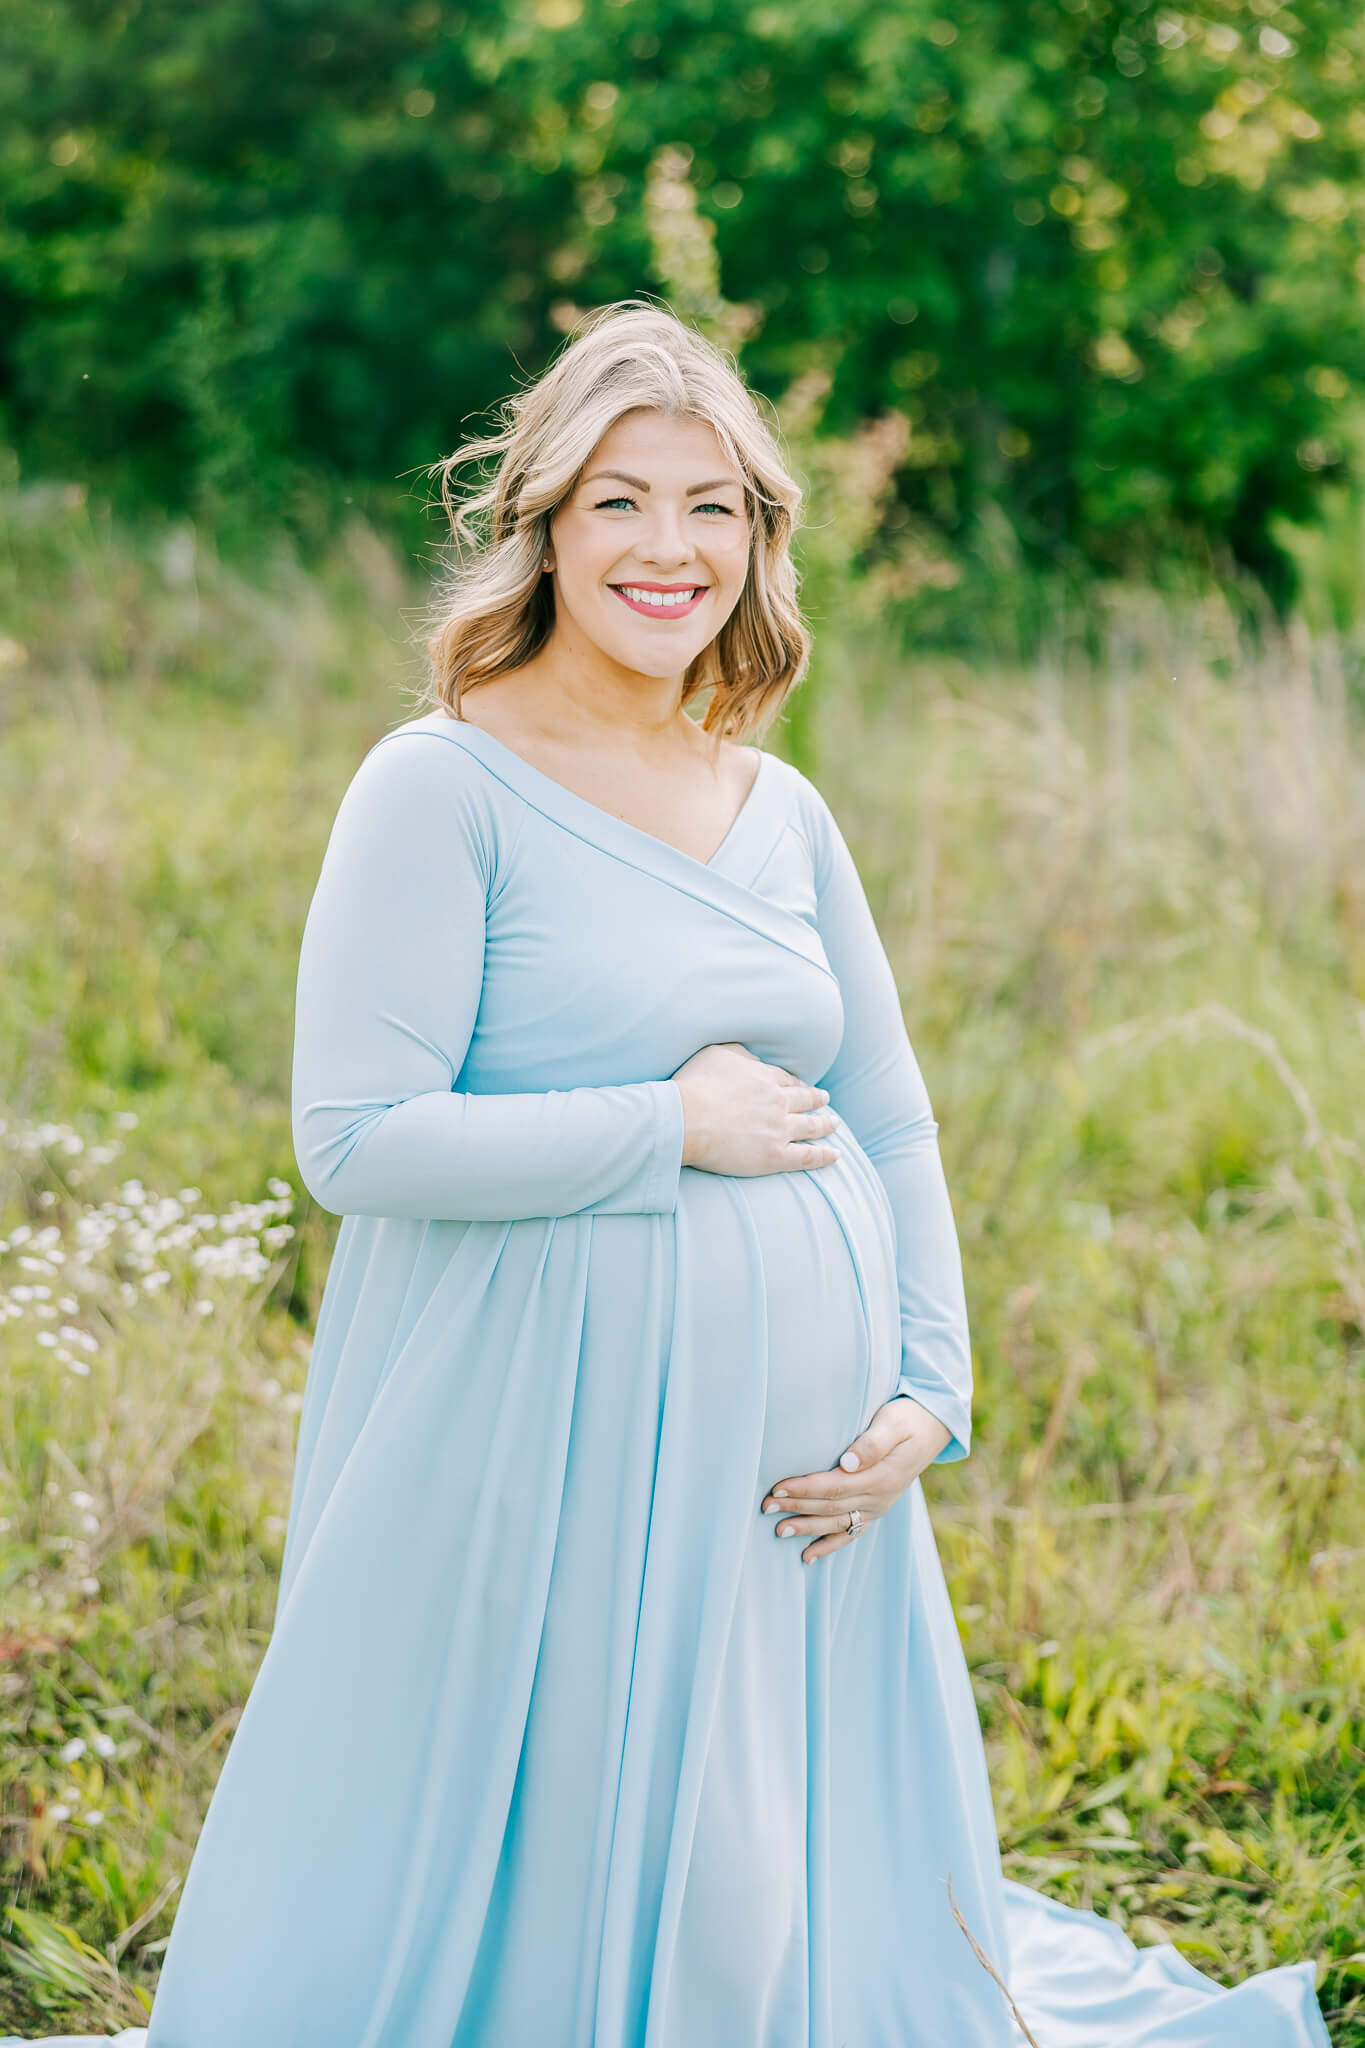 Pregnant mom capturing a smile during her atlanta maternity photography session.  Mom is wearing a light blue dress from my client closet.